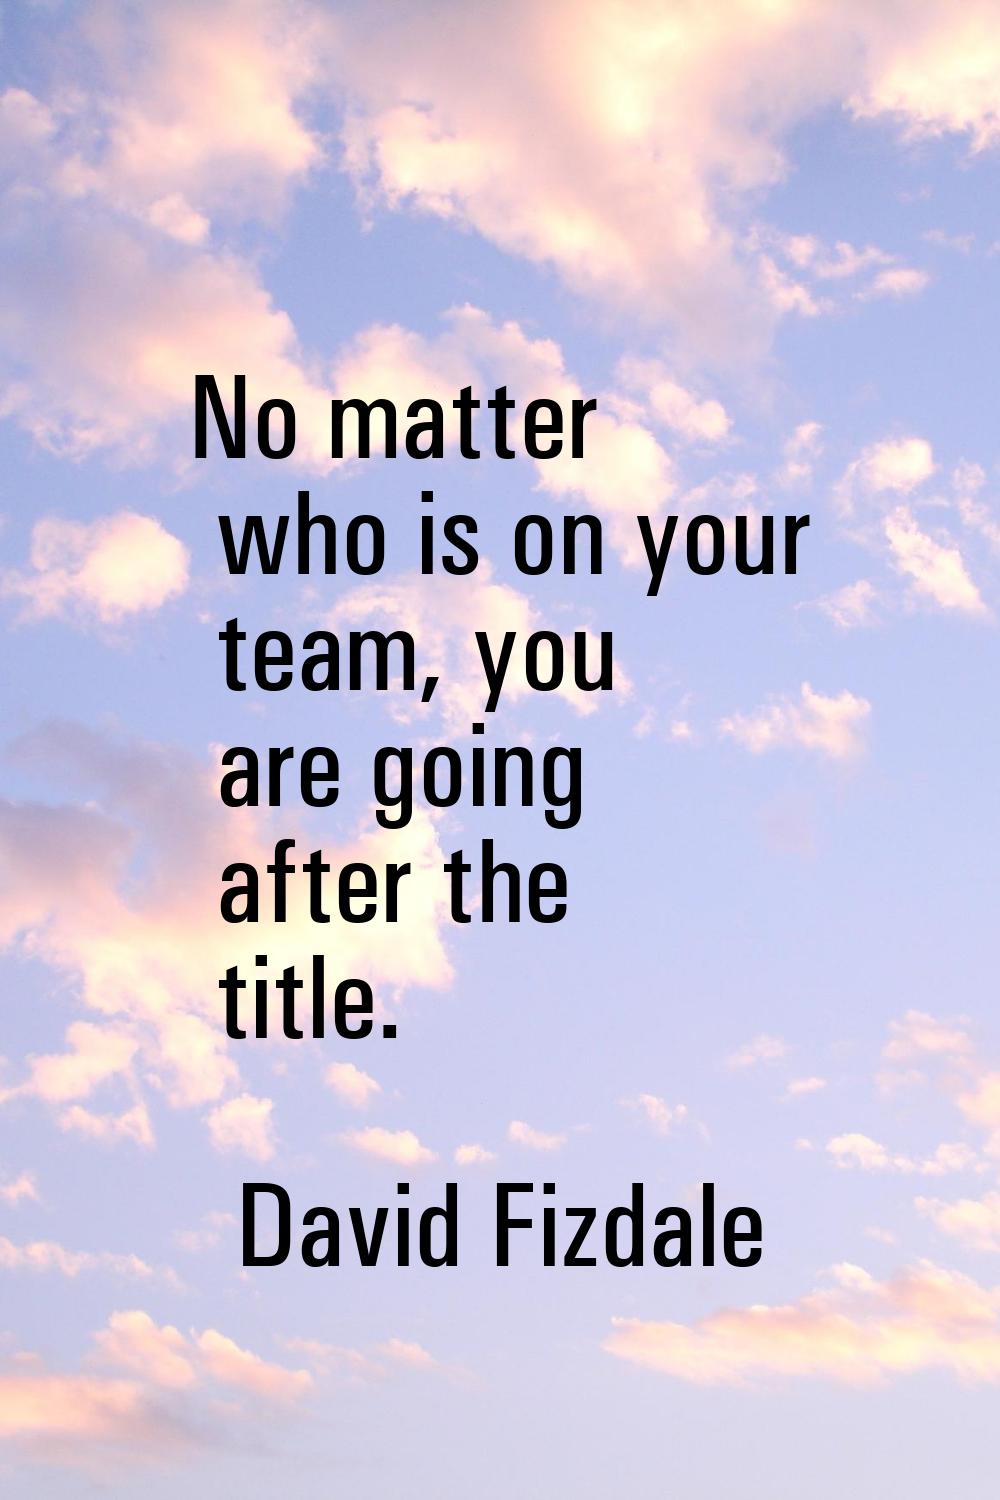 No matter who is on your team, you are going after the title.